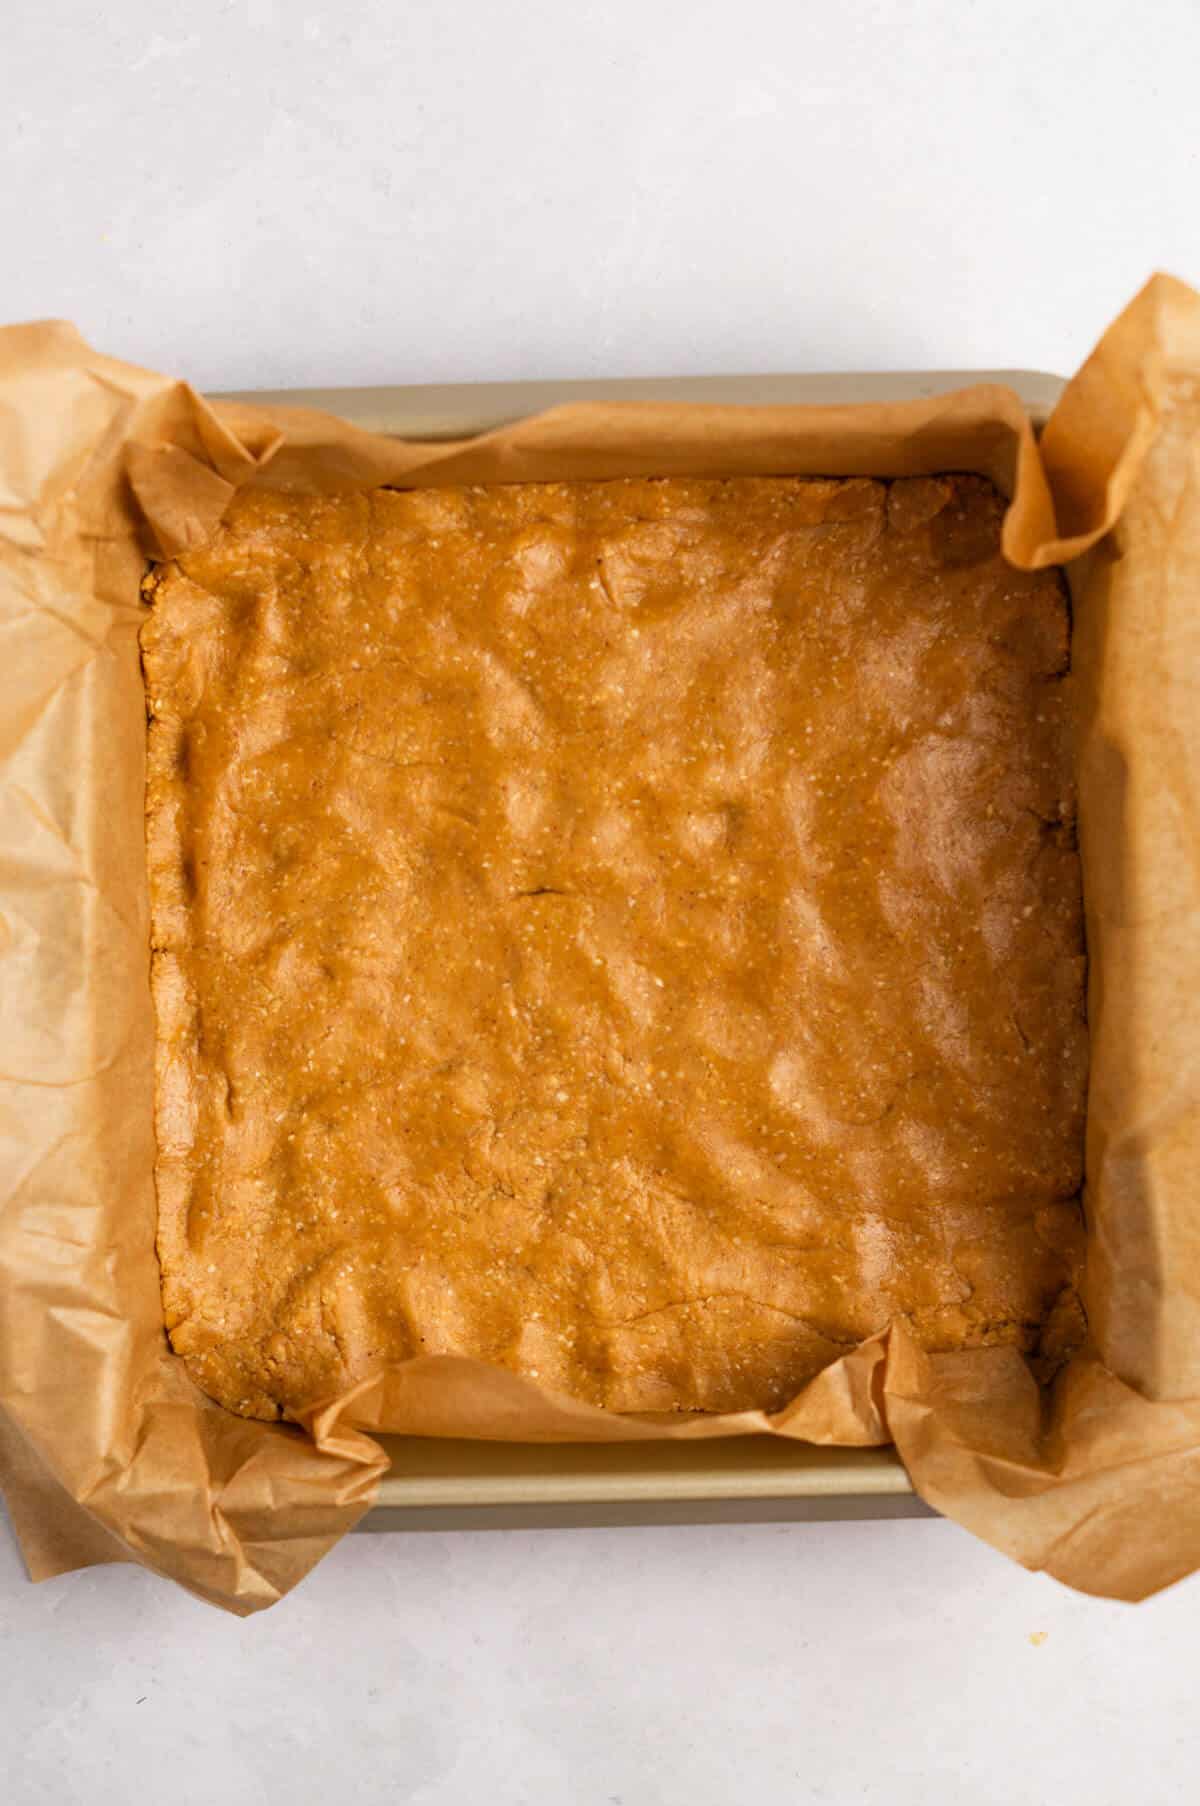 Pan of peanut butter oat layer.